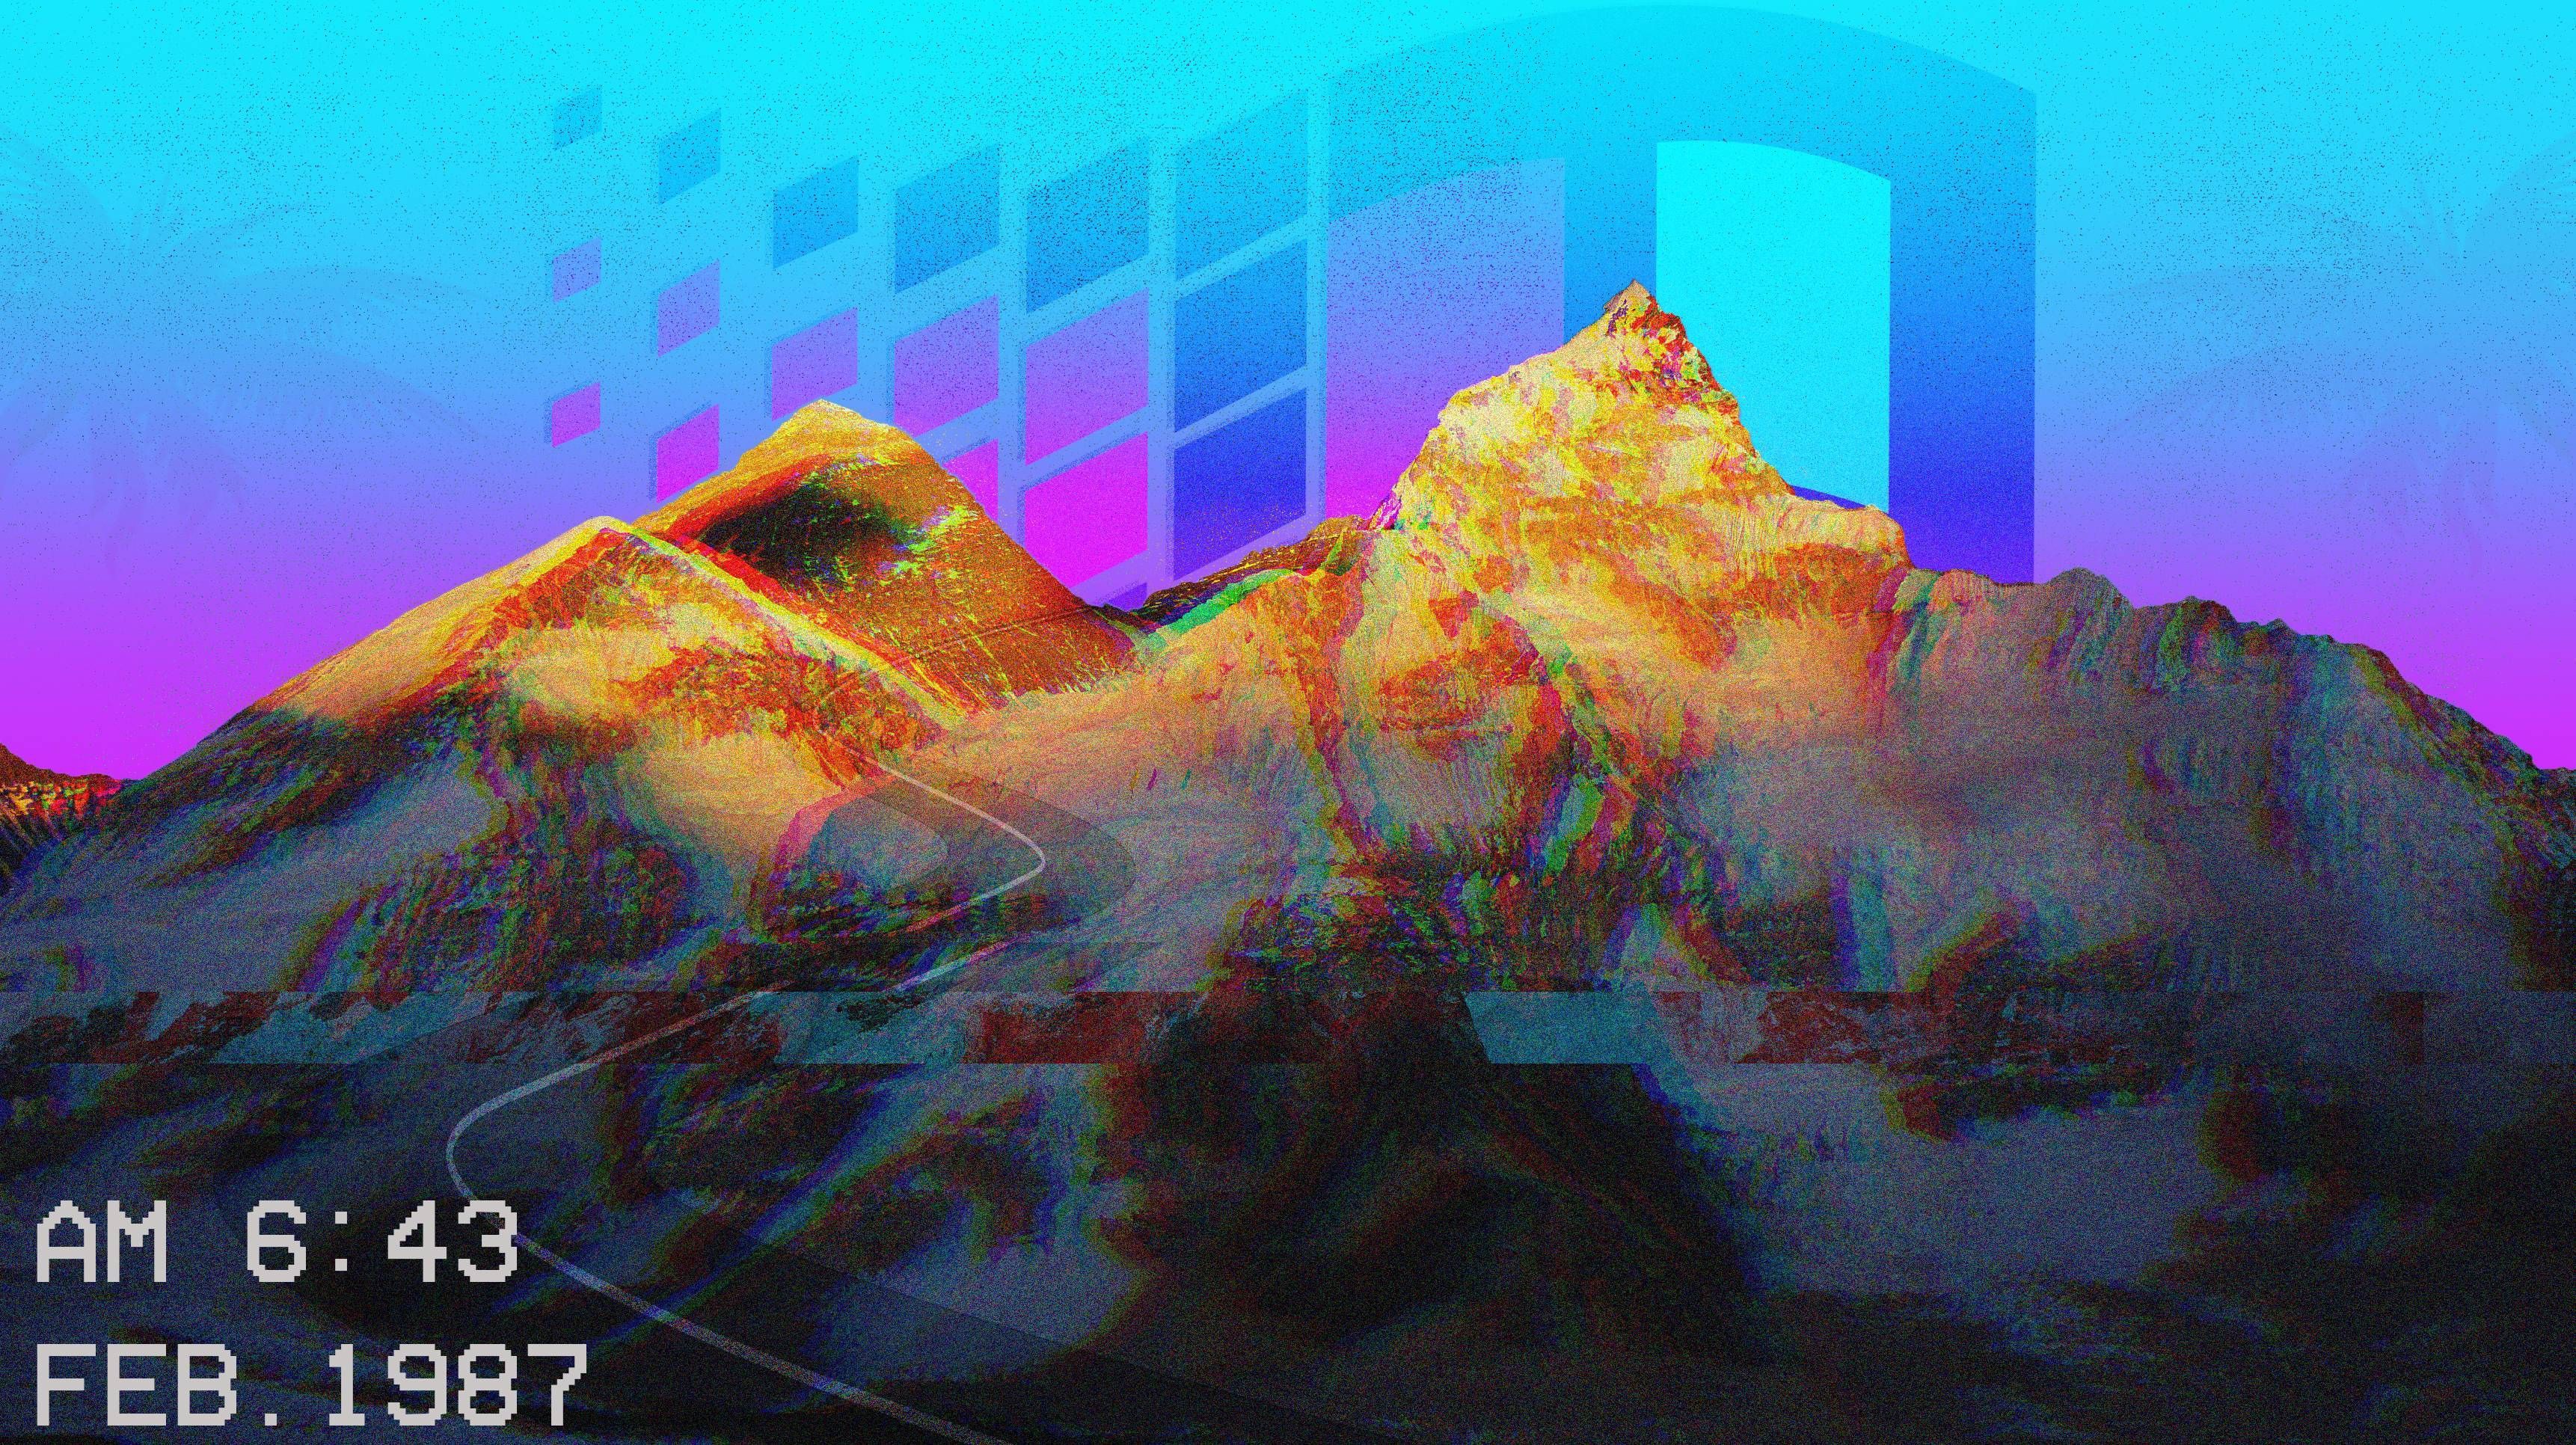 A colorful image of a mountain with the time 6:43 and the date February 1987 - 90s